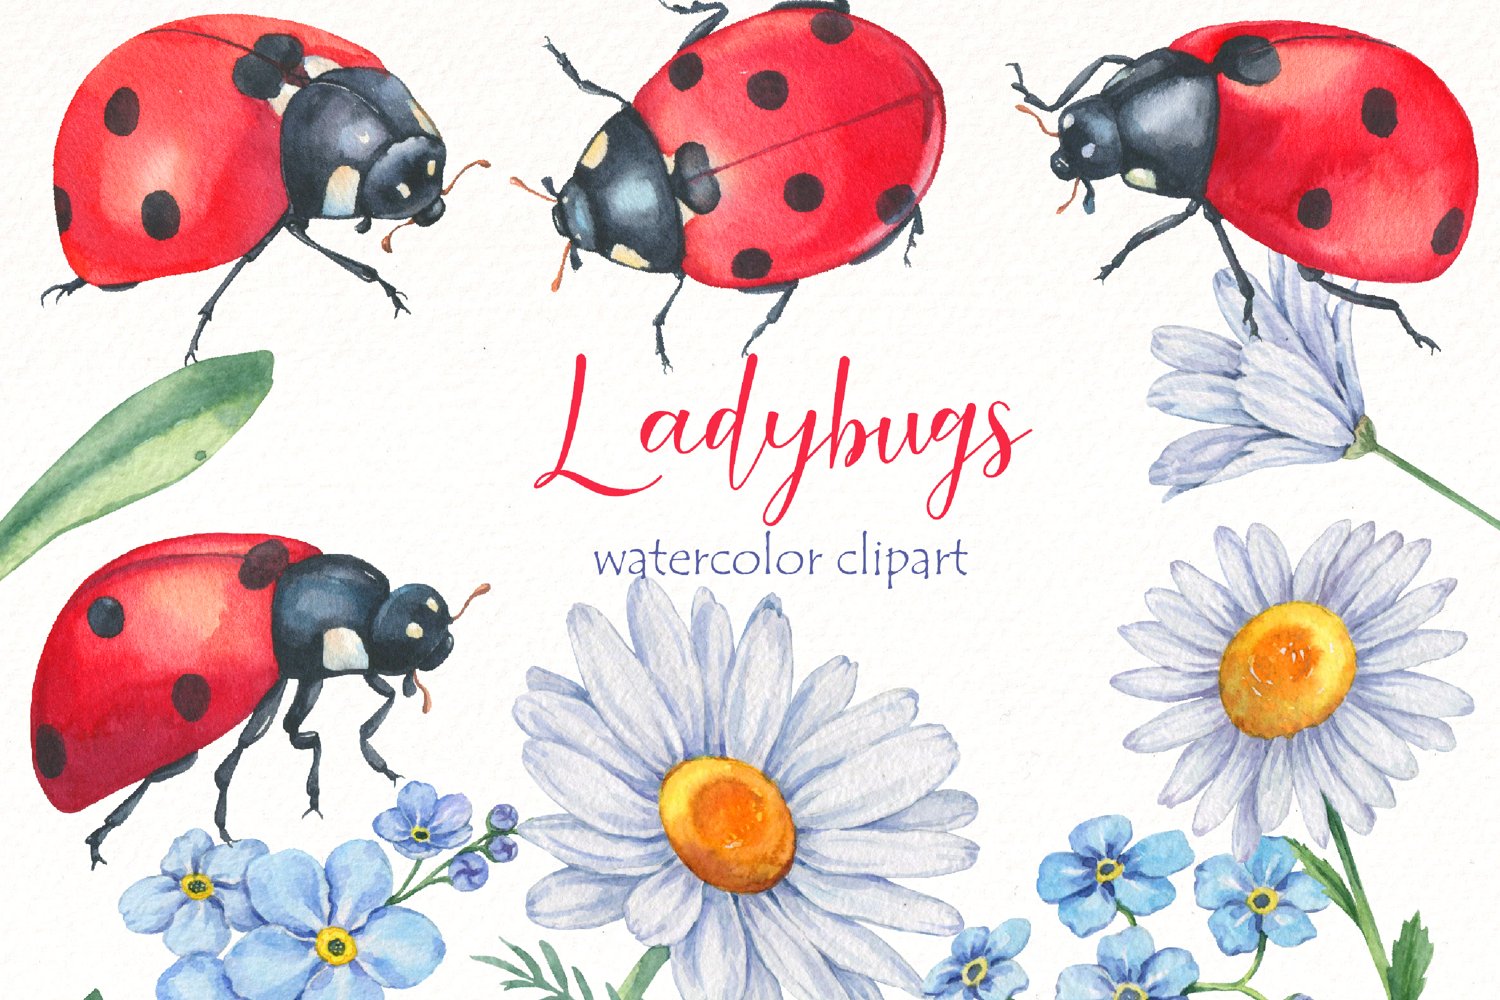 Cover image of Watercolor ladybug clipart bundle.